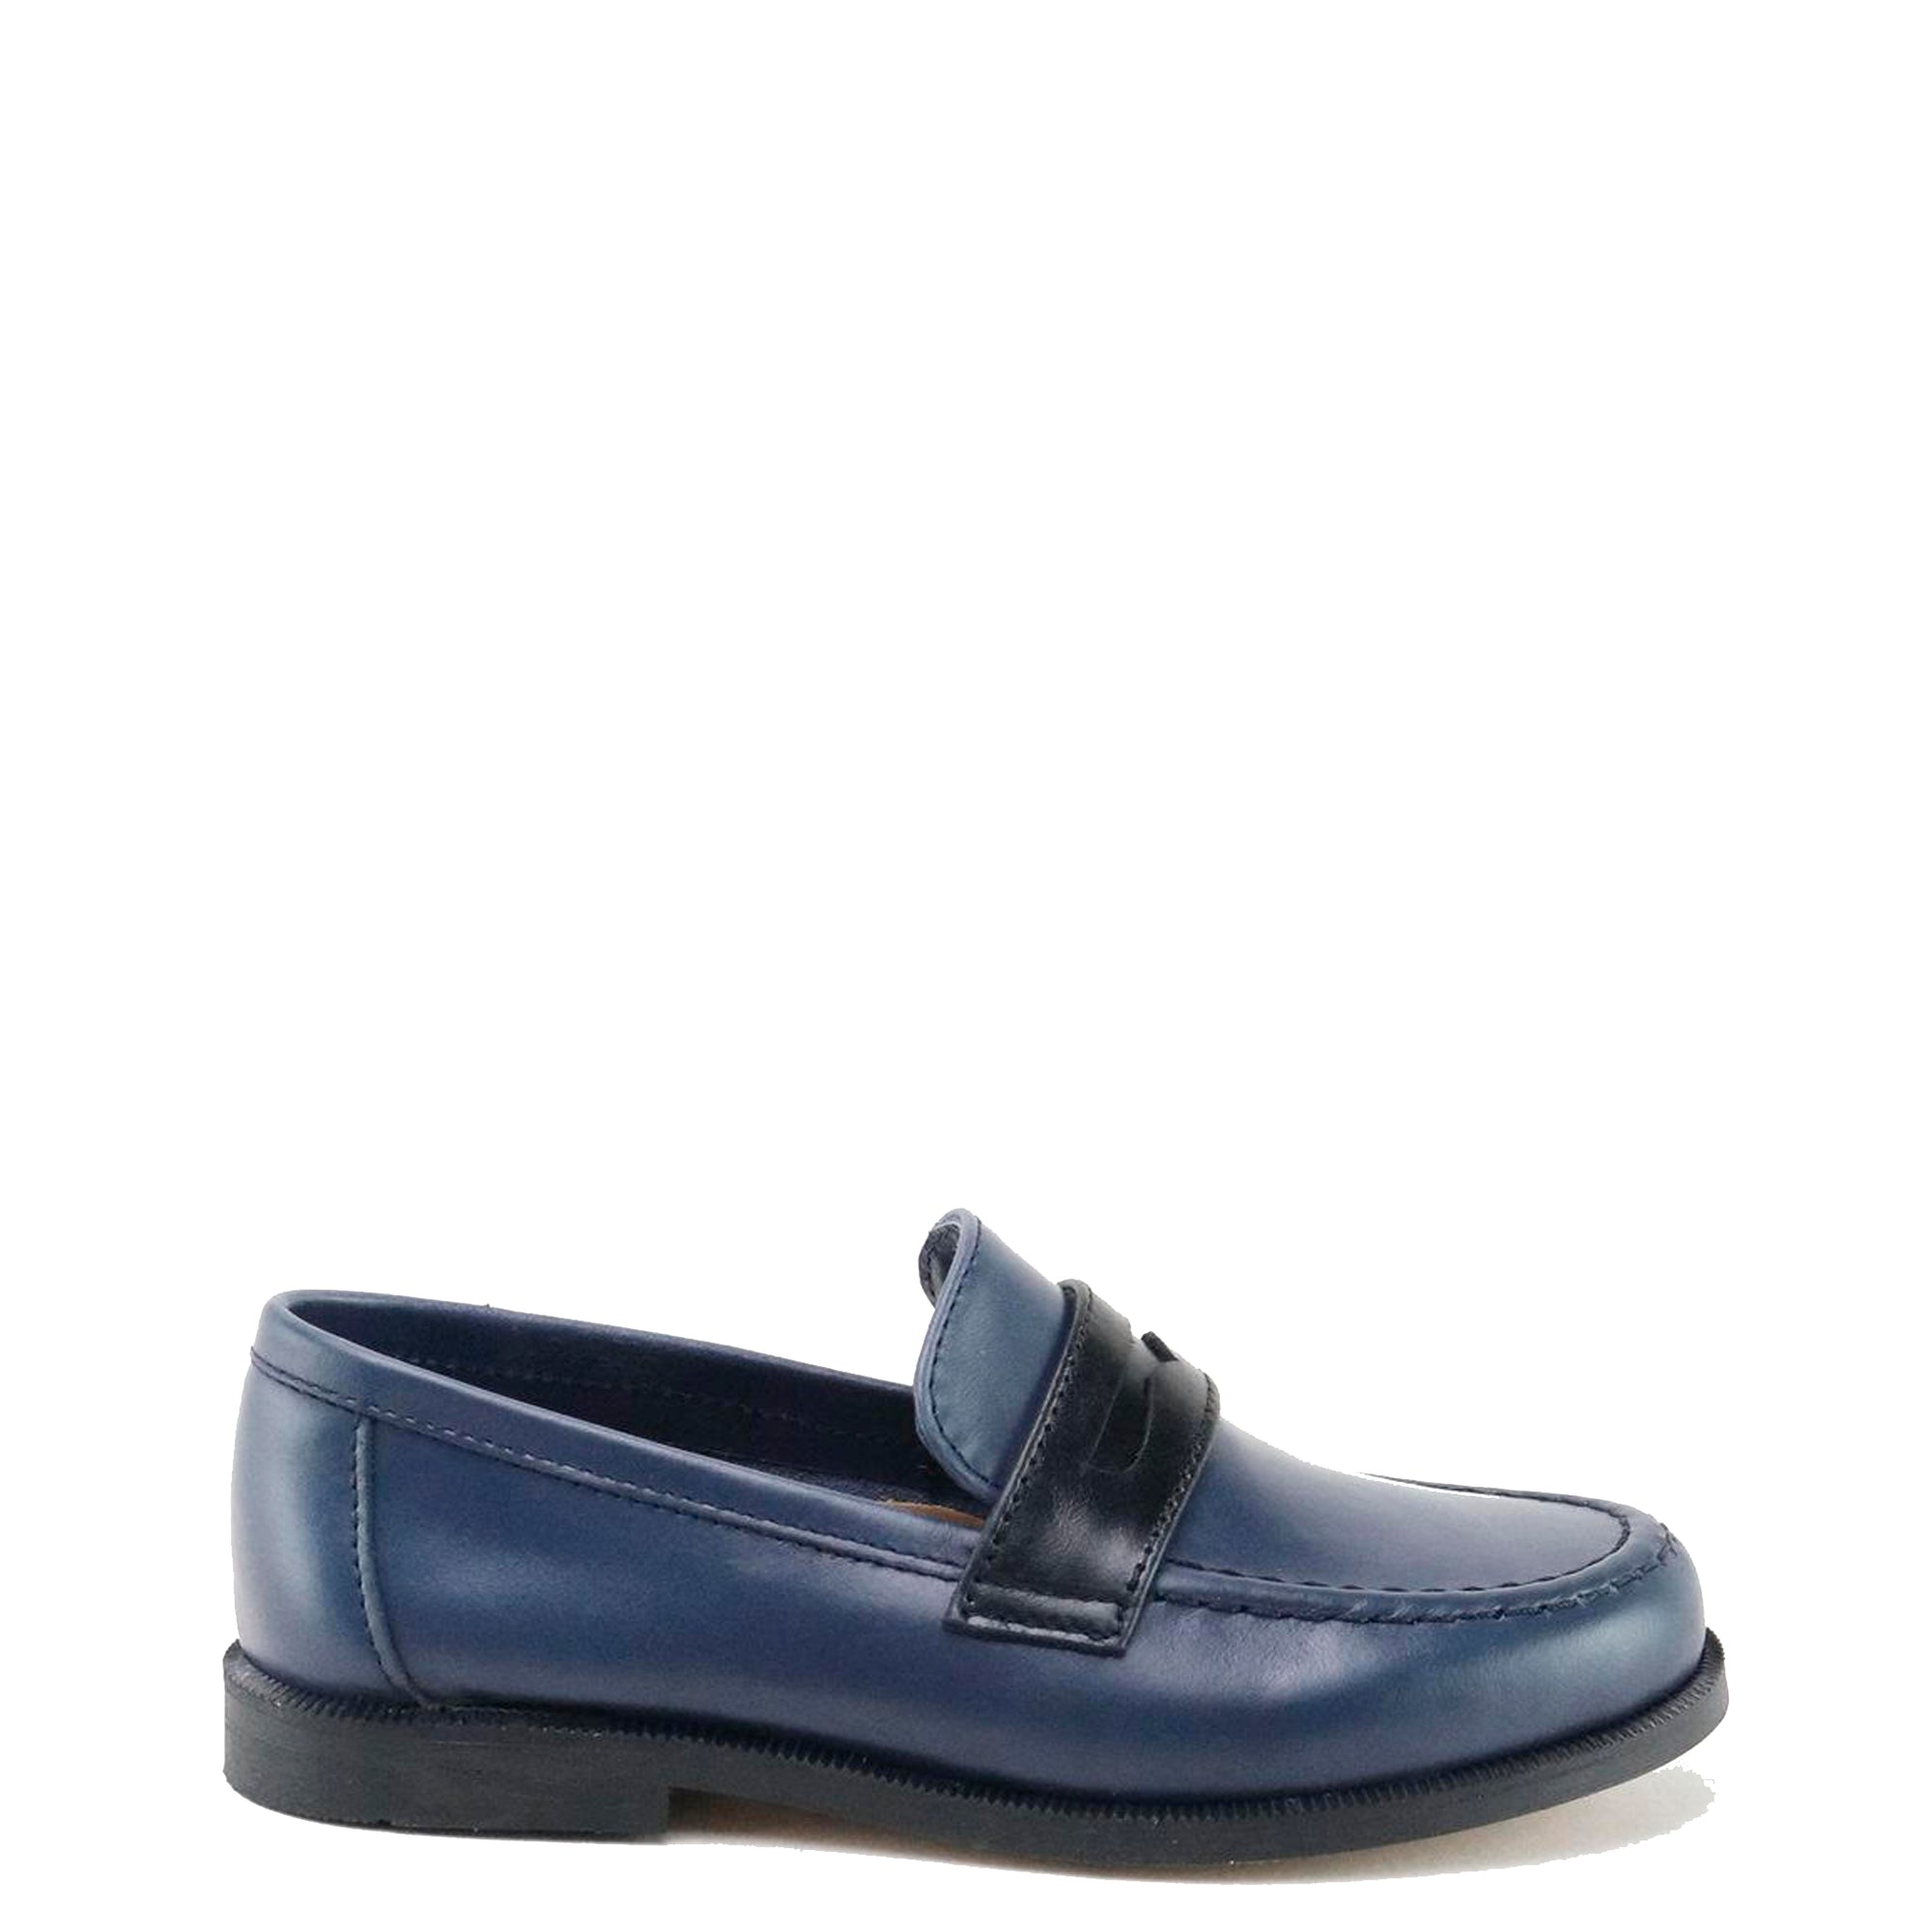 Papanatas Black and Navy Penny Loafer-Tassel Children Shoes